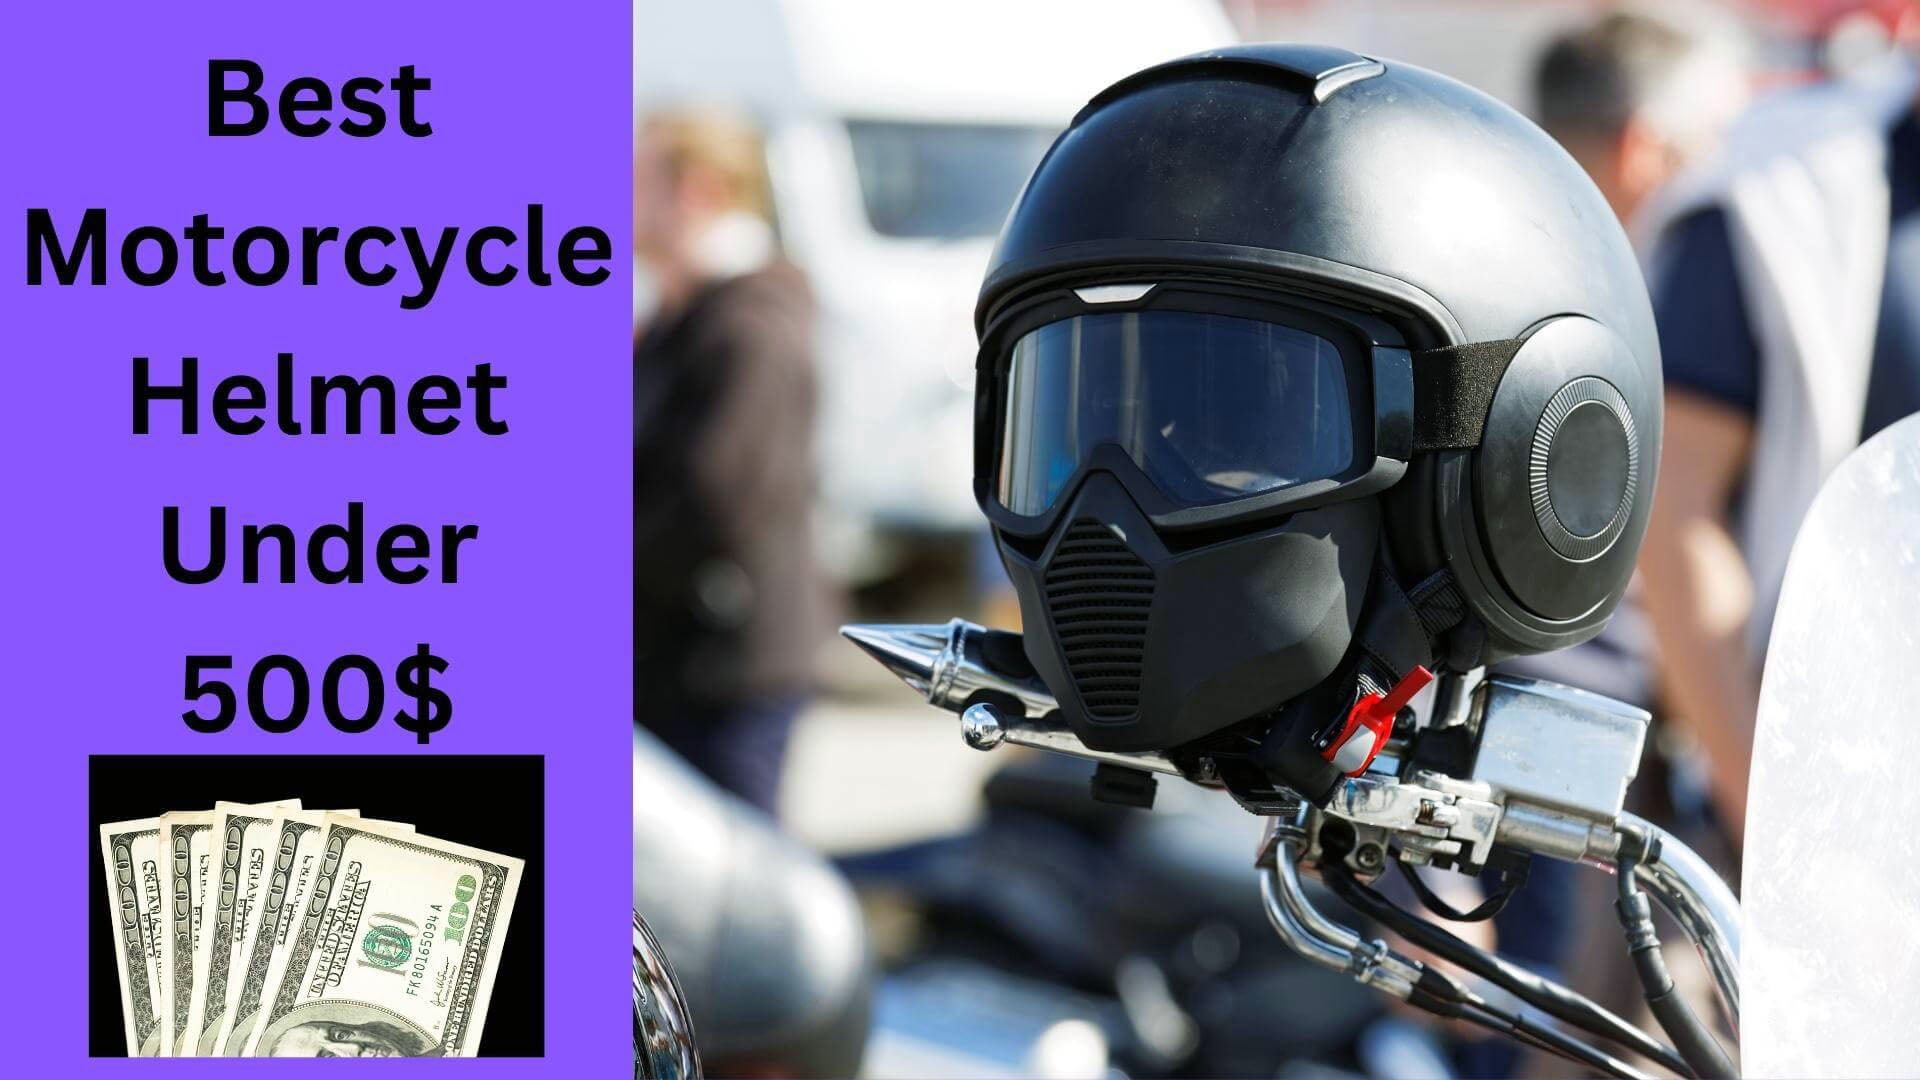 The 10 Best Motorcycle Helmets Under $500 You’ll Love